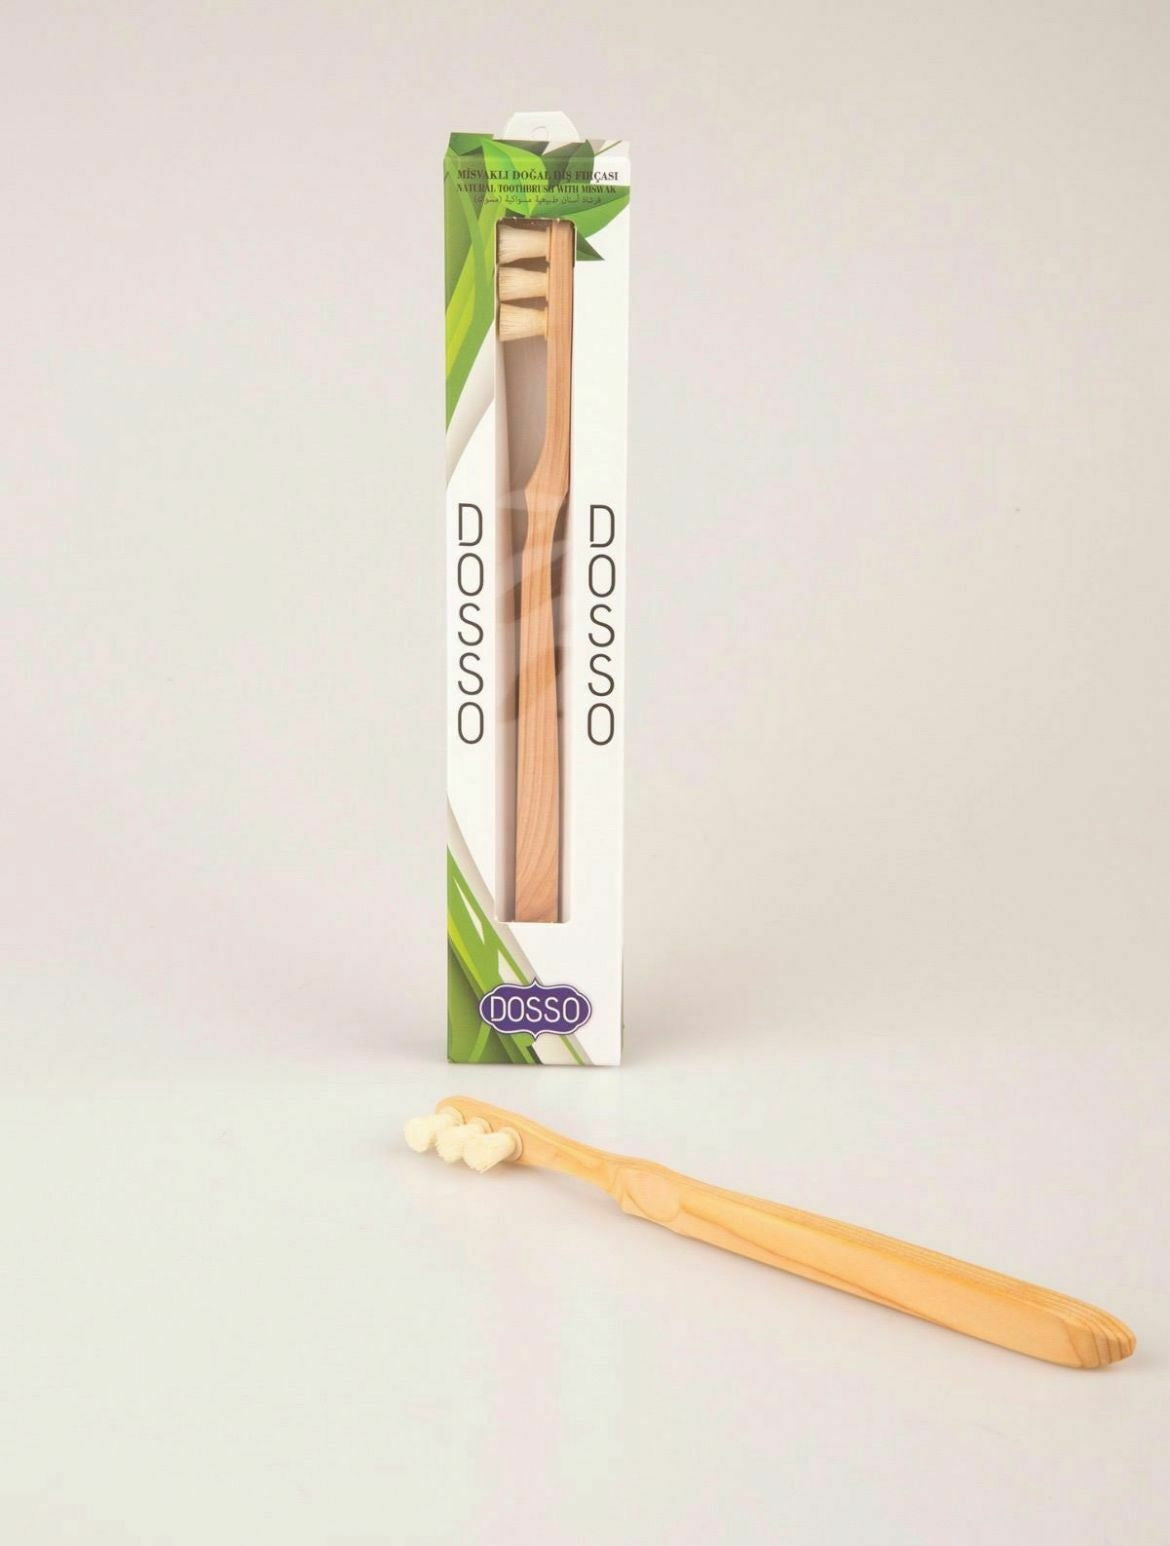 Toothbrush With Miswak By Dosso